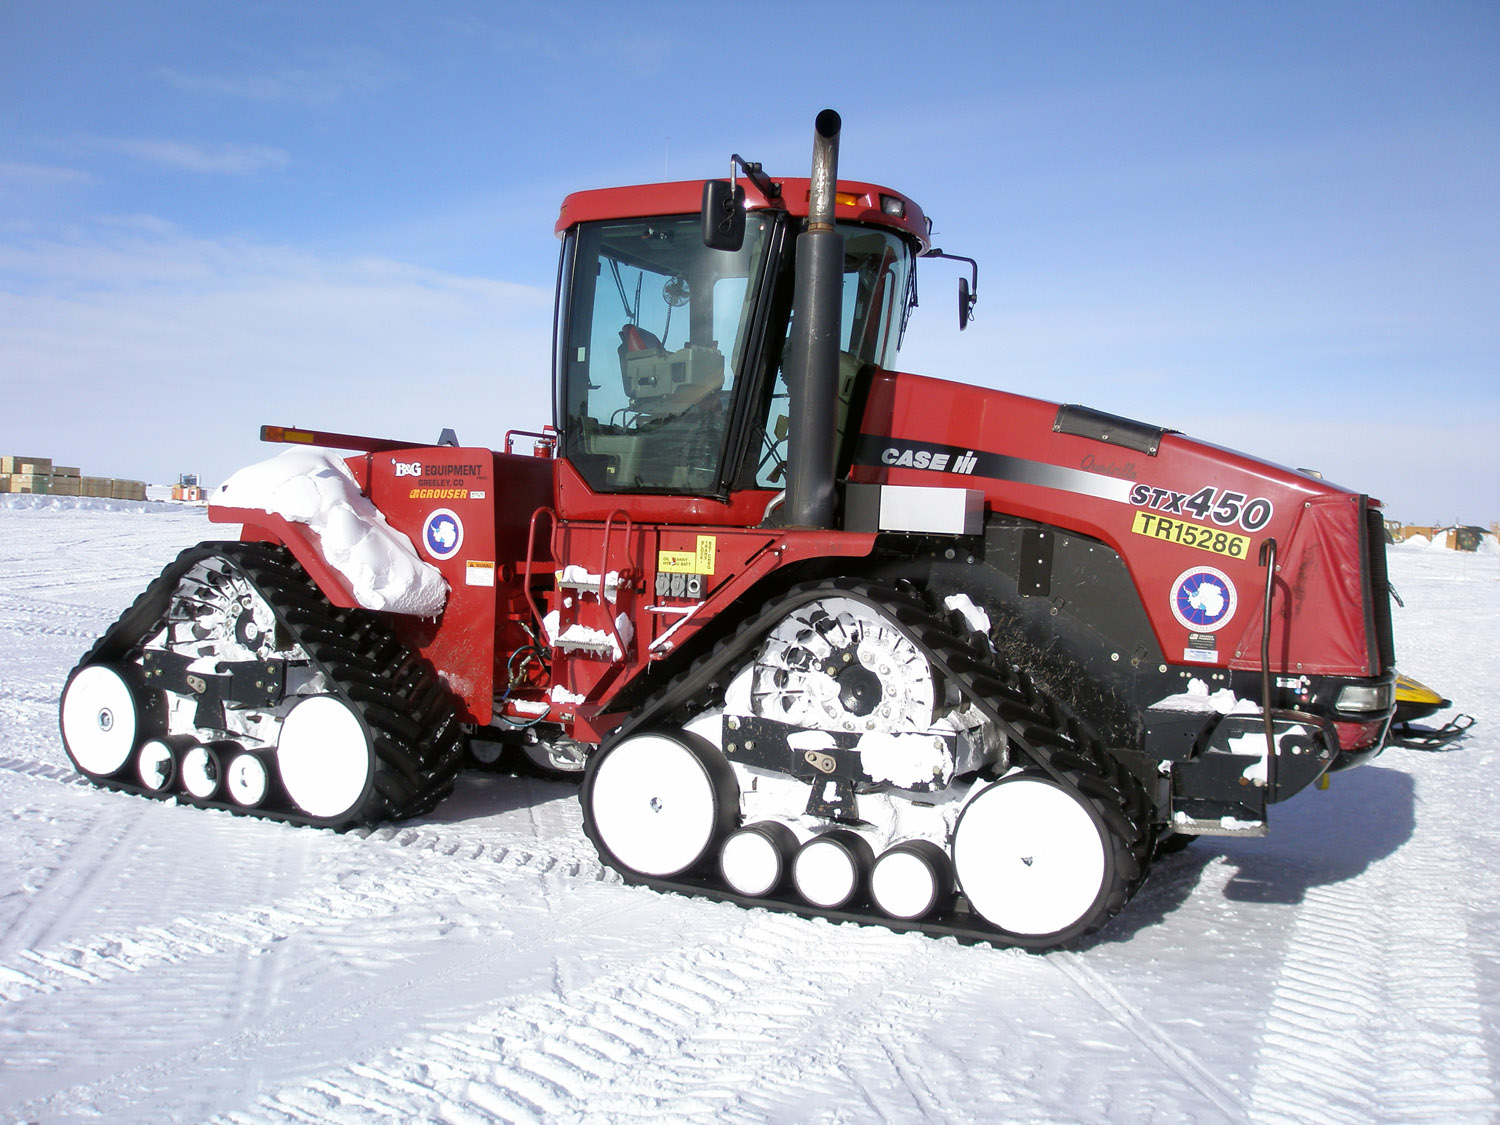 Vehicles and equipment of the South Pole Traverse - 05